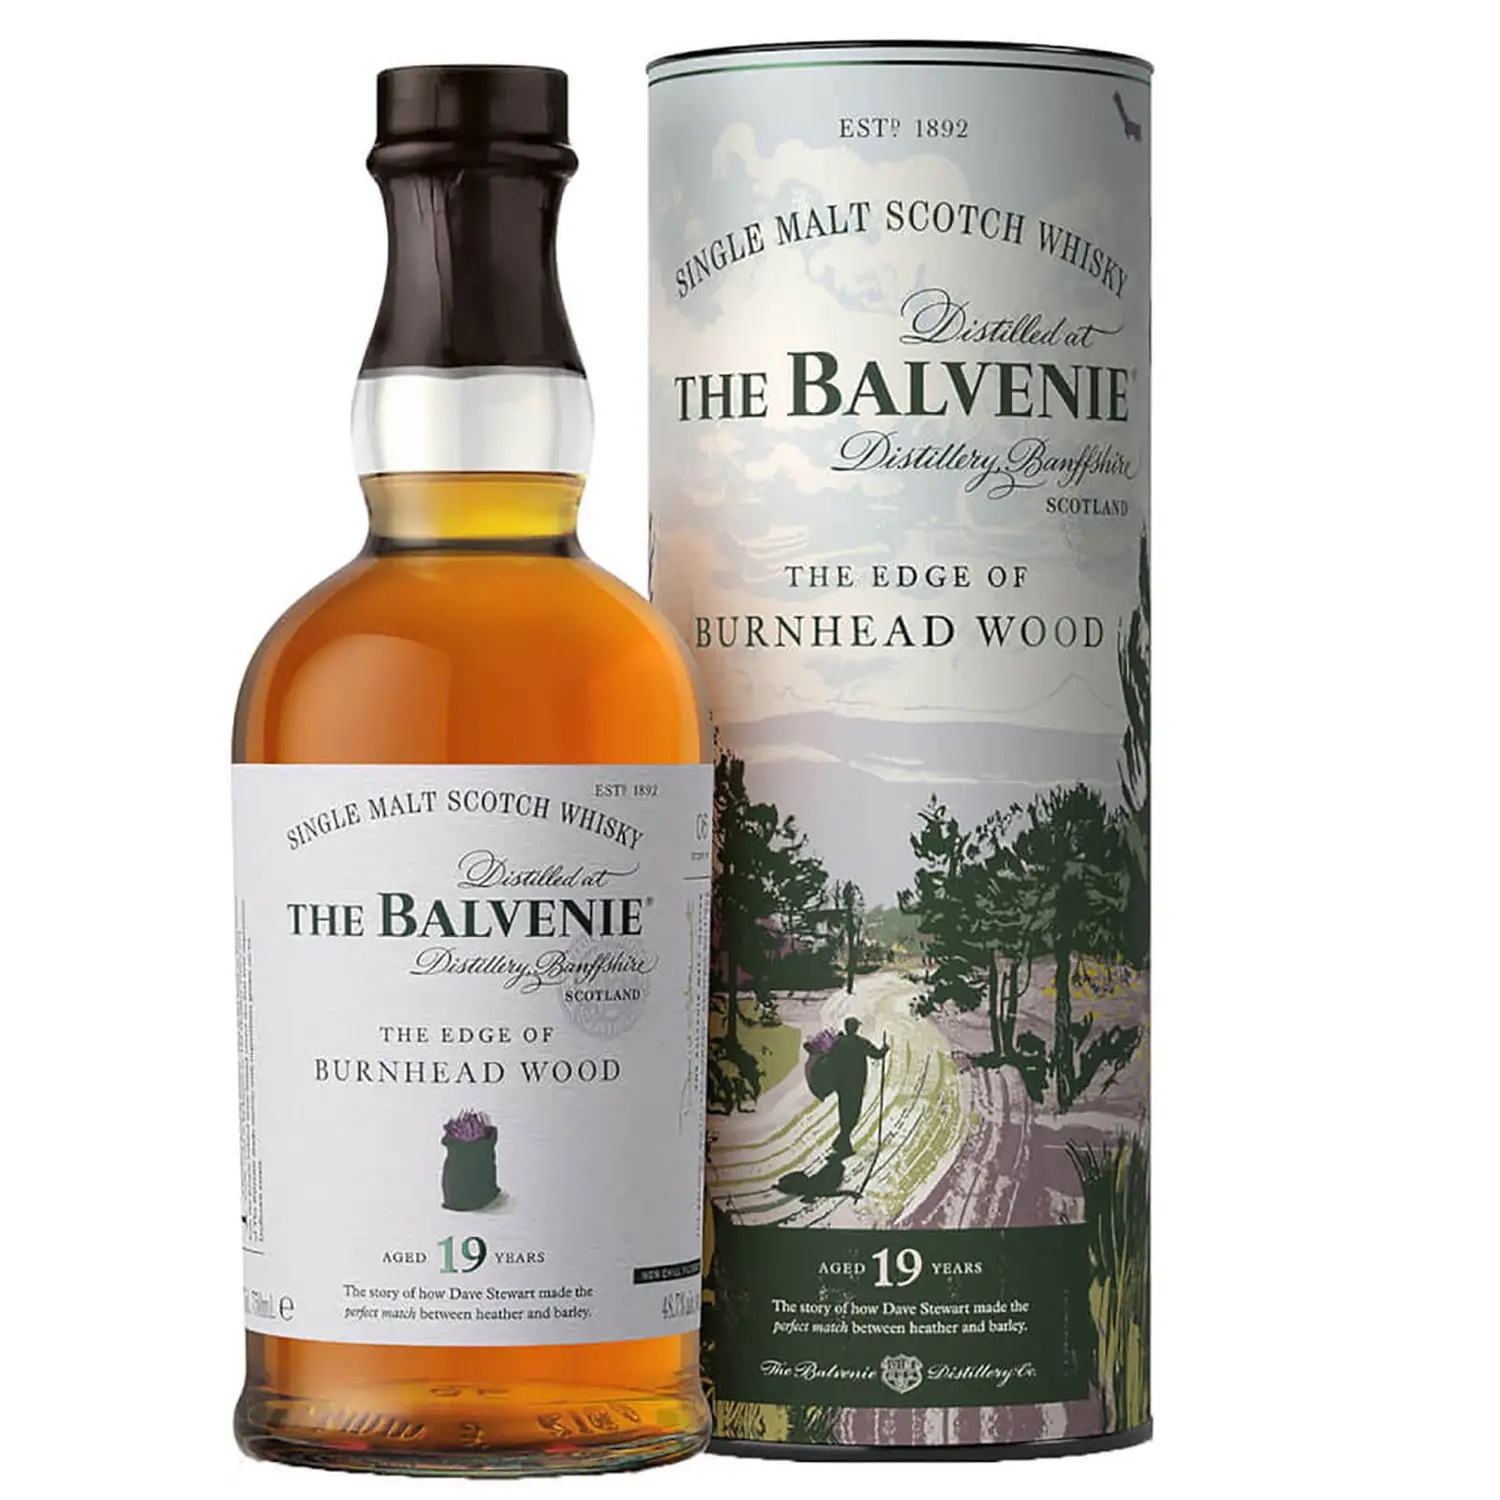 Balvenie 19 Year Old The Edge Of Burnhead Wood Single Malt Scotch Whisky 70cl Buy Online For